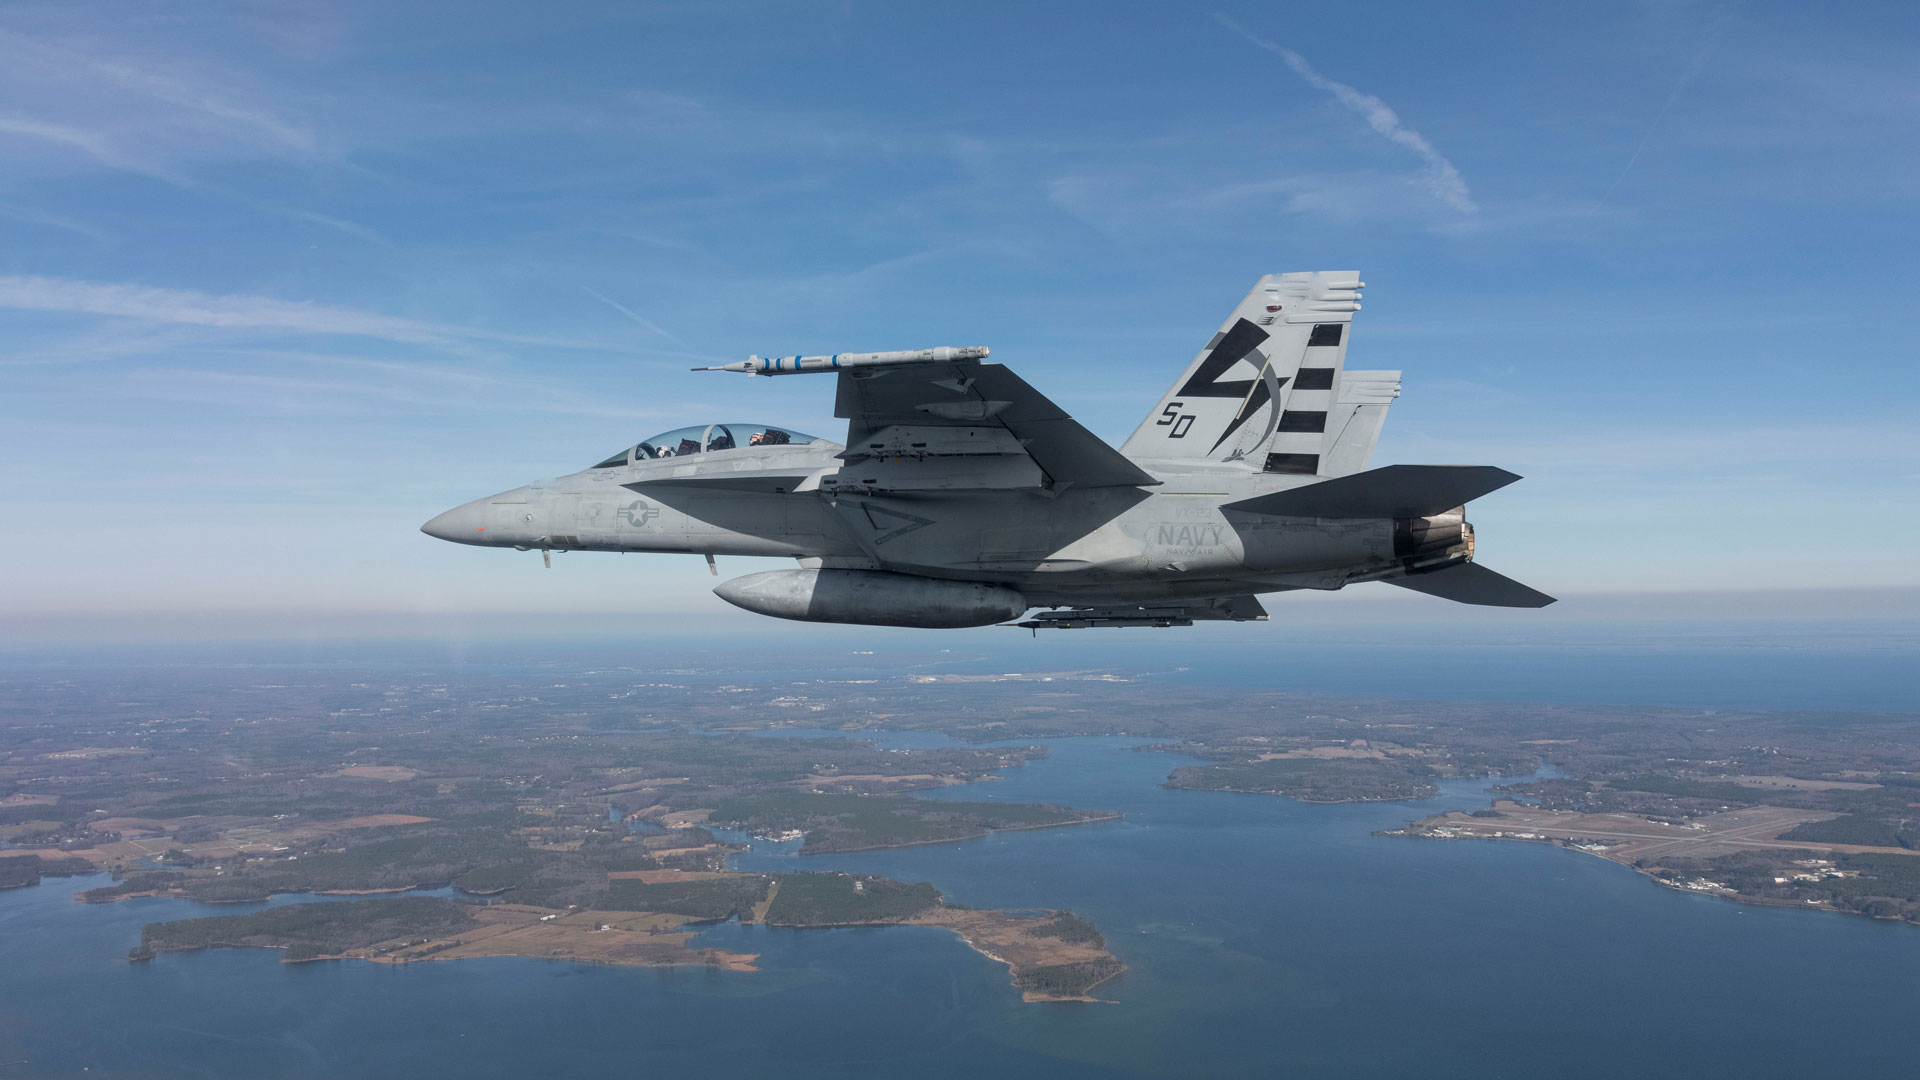 TCTS Inc Completes Successful First Flight on US Navy F/A-18E at Naval Air Station Patuxent River